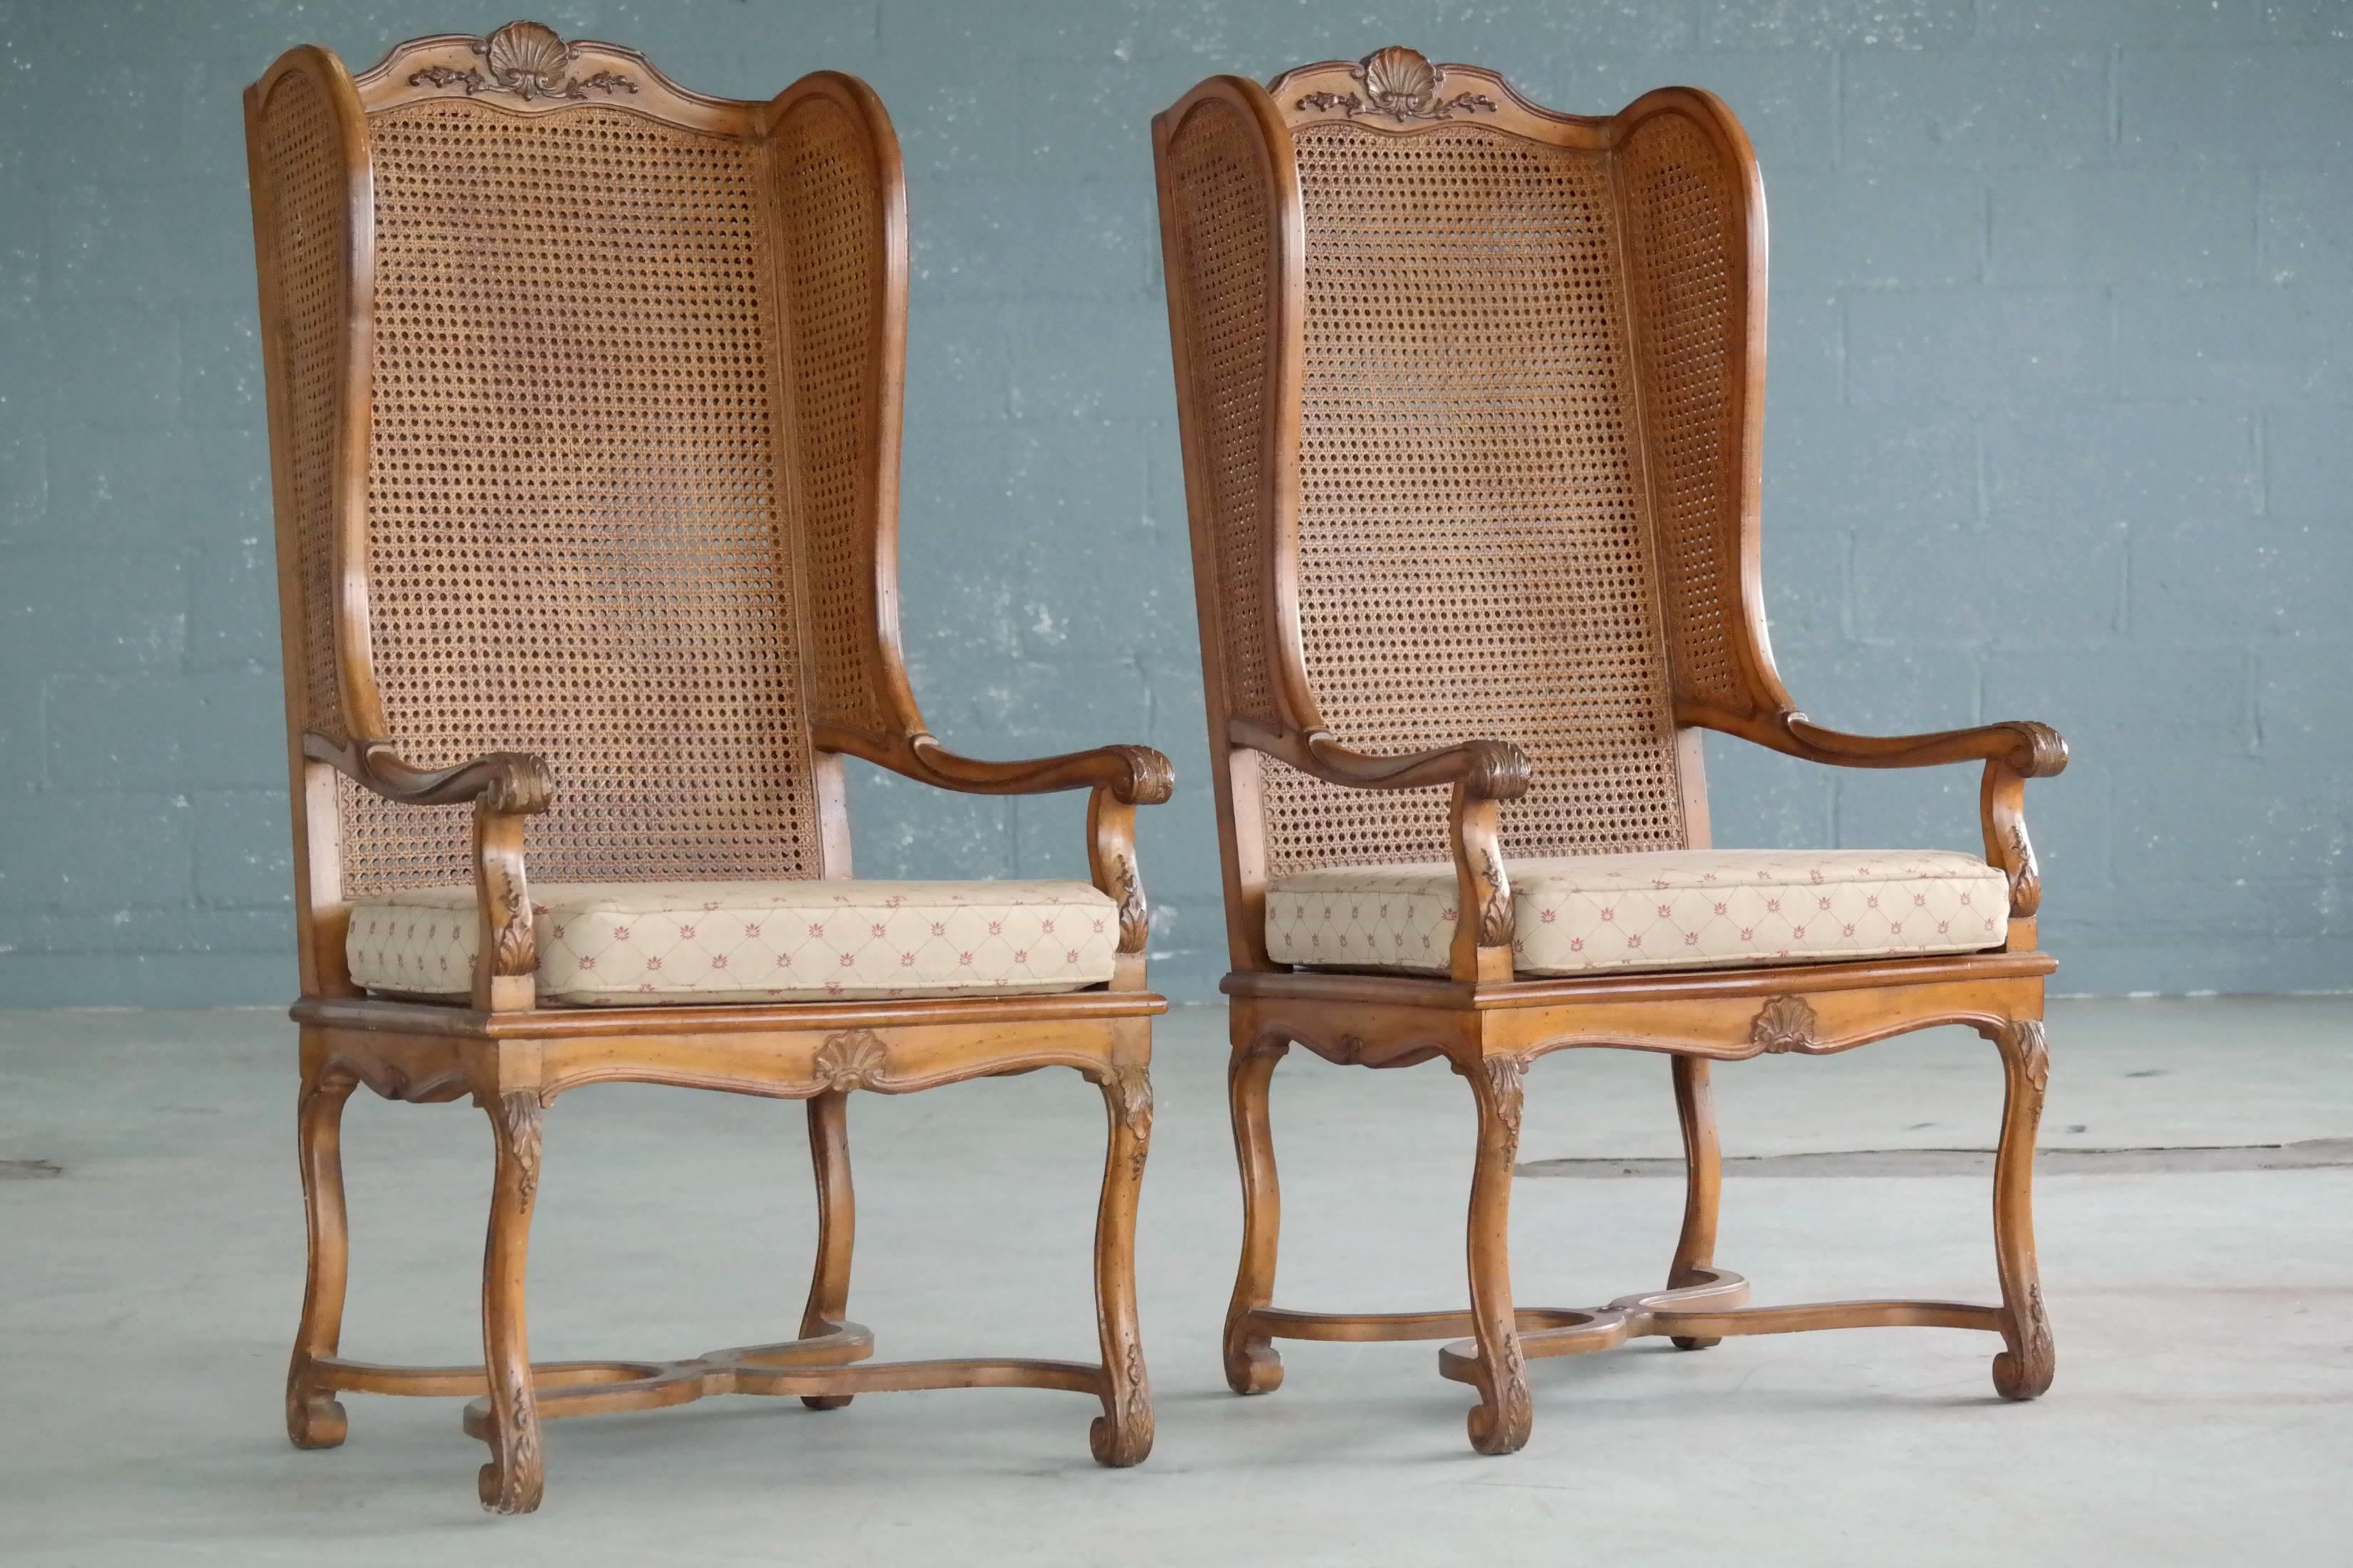 Super stylish pair of 1920s American Hollywood Regency tall wingback chairs in rare double cane. The chairs show appropriate age wear in the form of minor nicks and scuffs while the cane is in very near perfect condition. The chairs were part of the